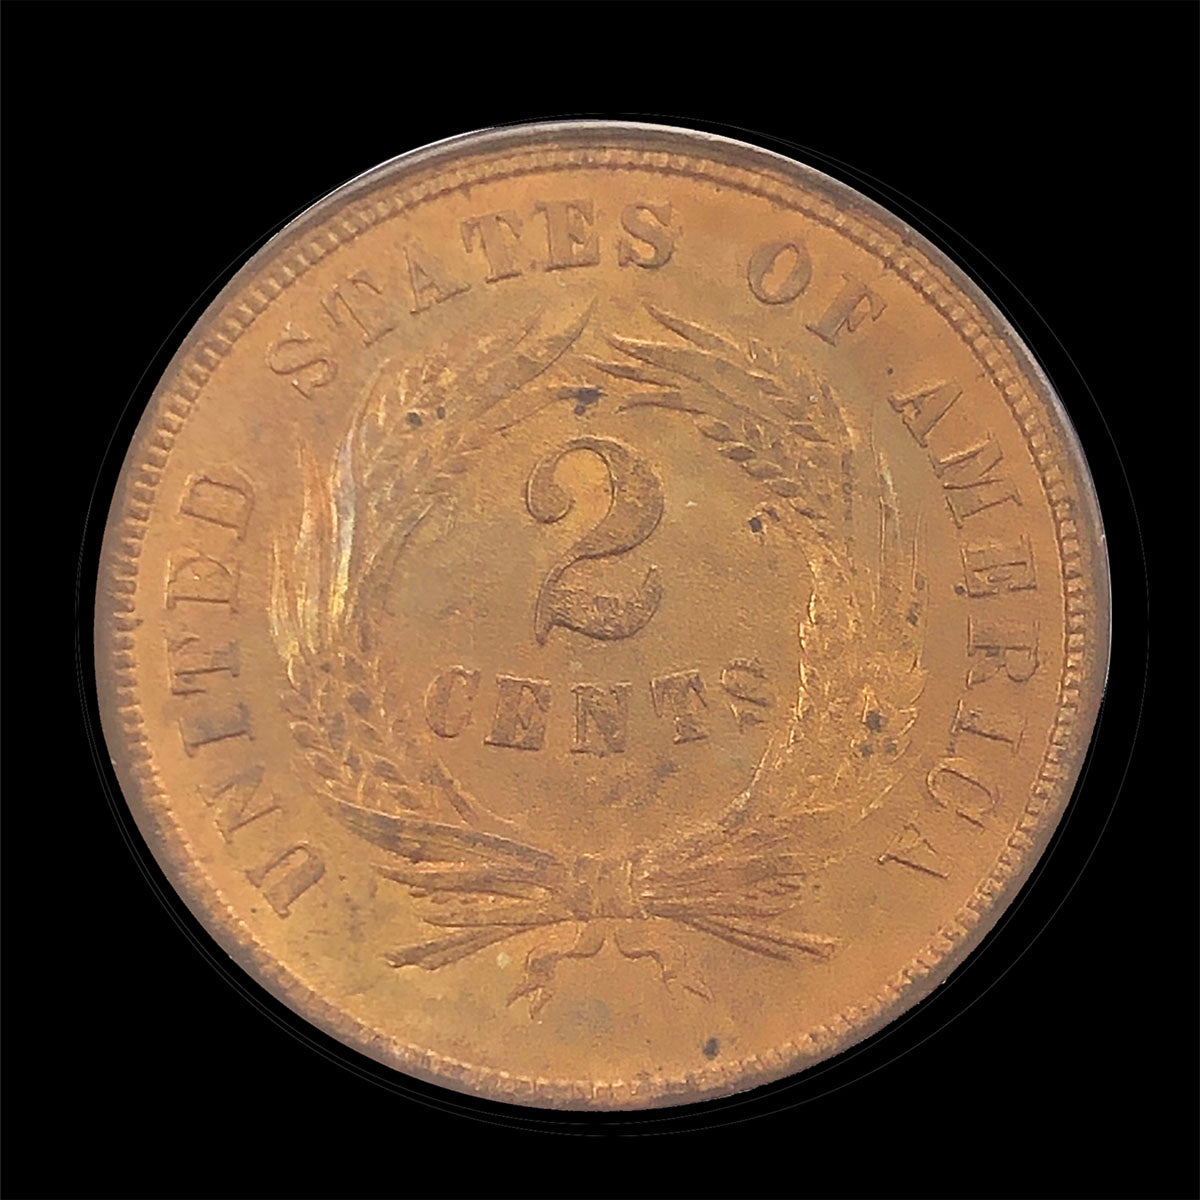 1865 Fancy 5 Two Cent Piece FS-1302 Repunched Date Vintage ANACS AU55